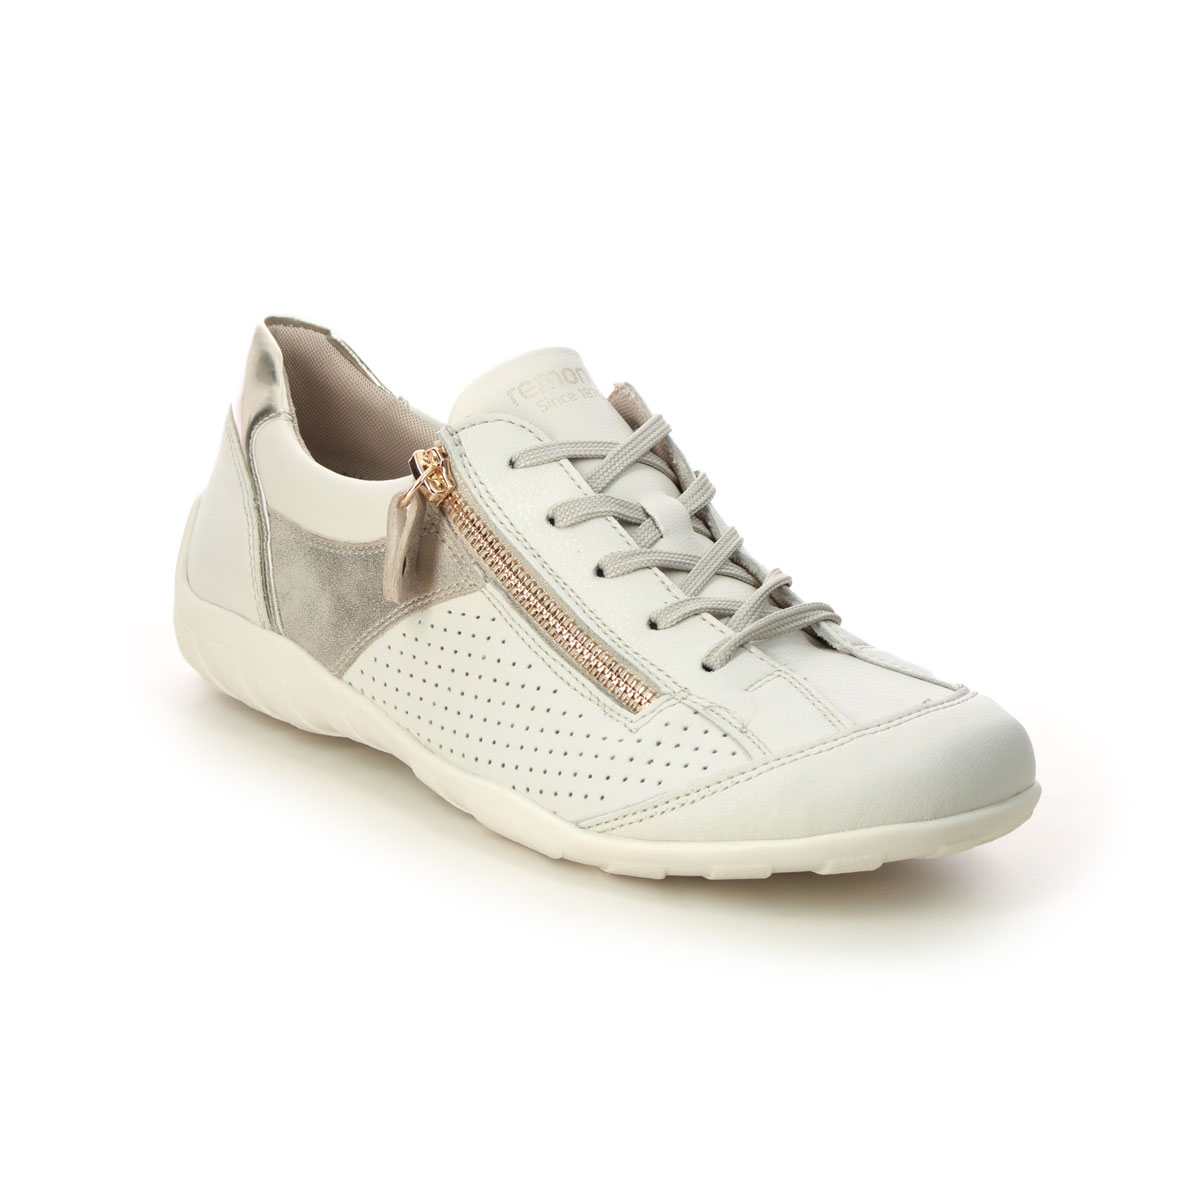 Remonte R3411-80 Livzipa Beige leather Womens lacing shoes in a Plain Leather in Size 39